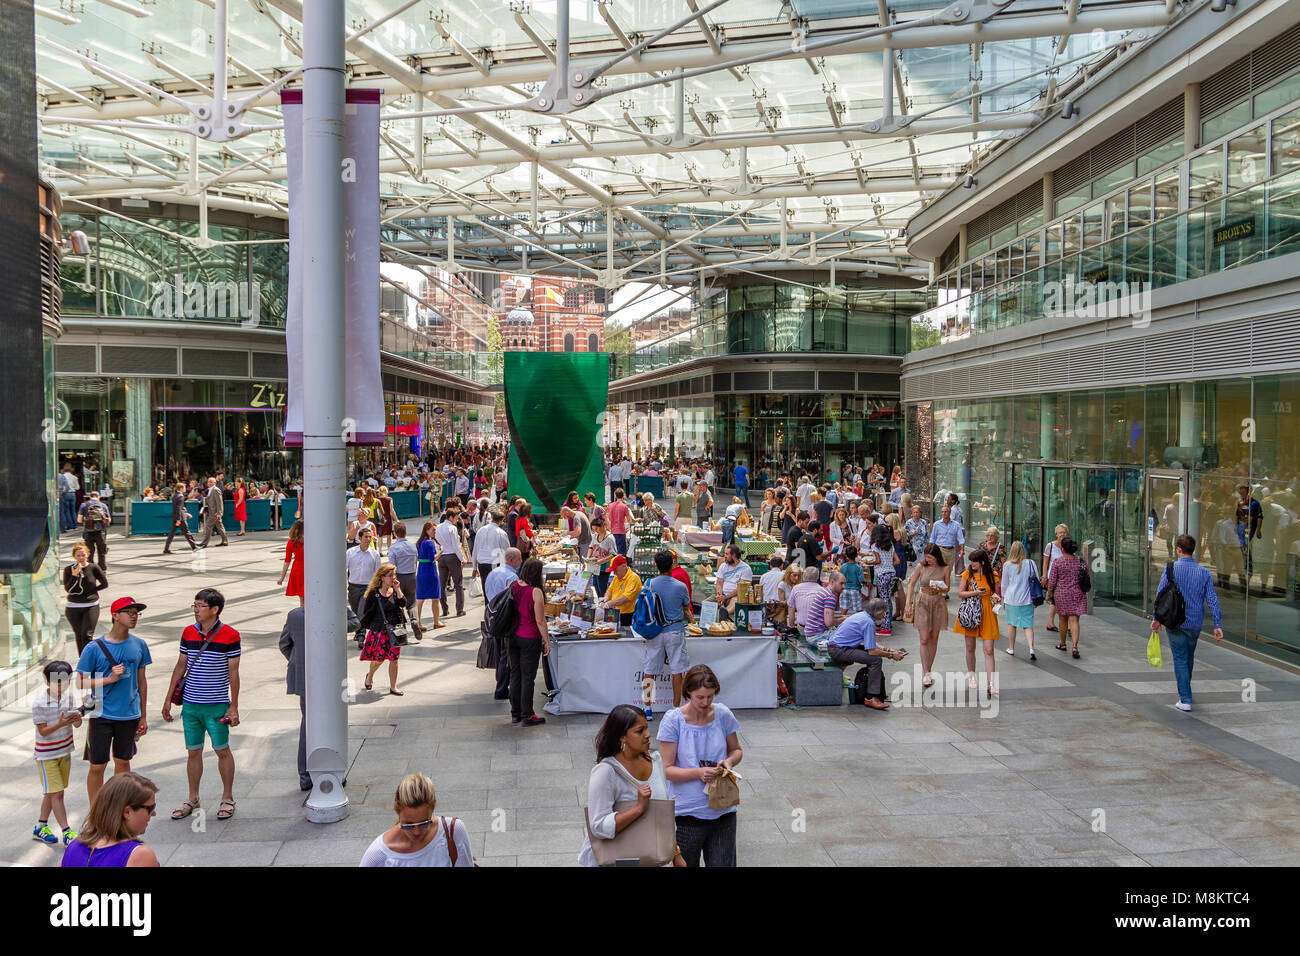 People at an indoor market at Cardinal Place , Victoria , London Stock Photo